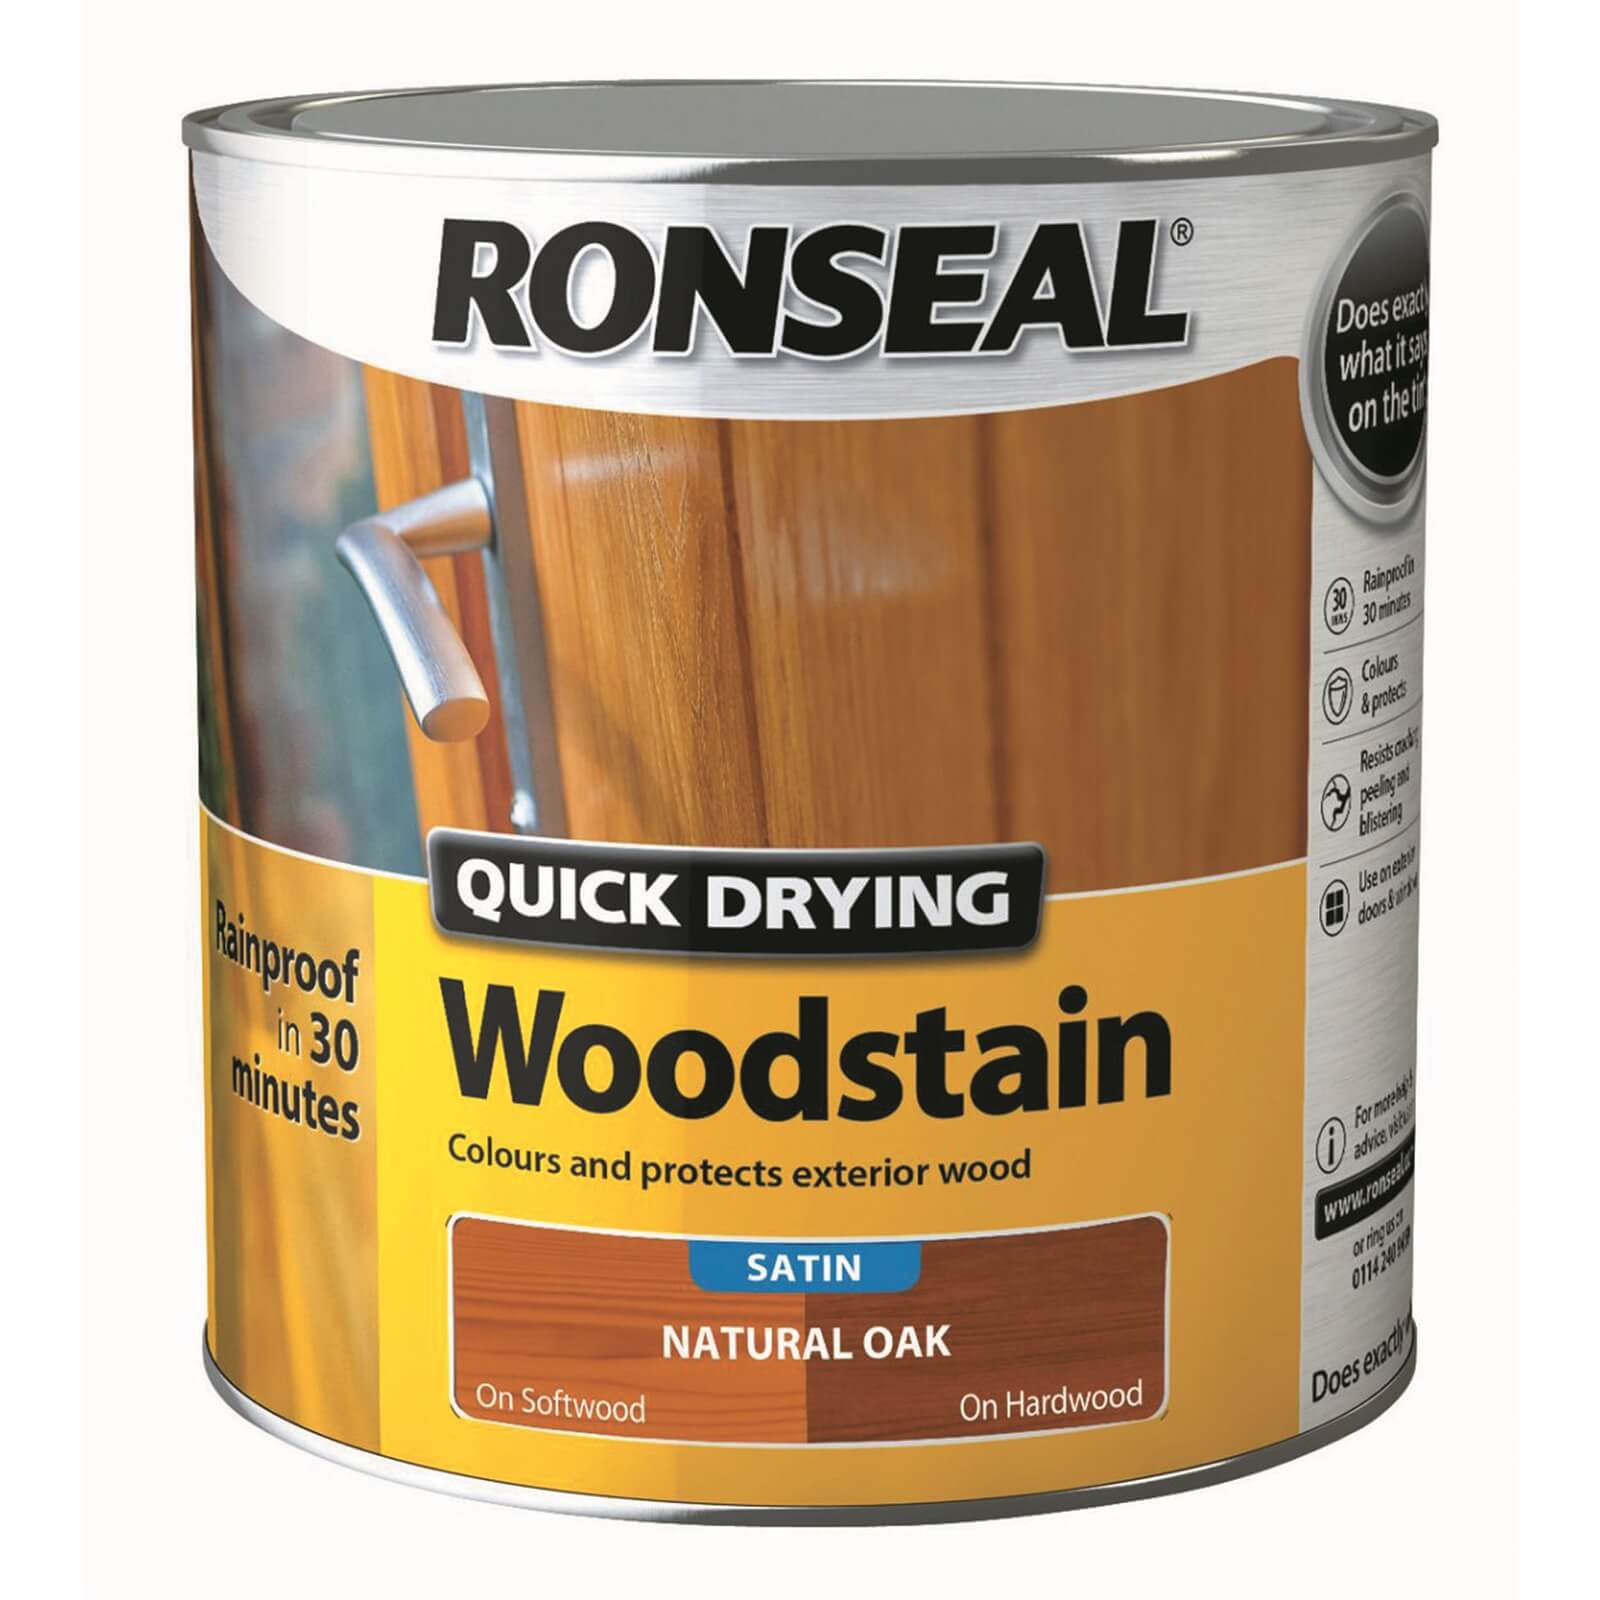 Ronseal Quick Drying Woodstain - Natural Oak Satin 2.5L